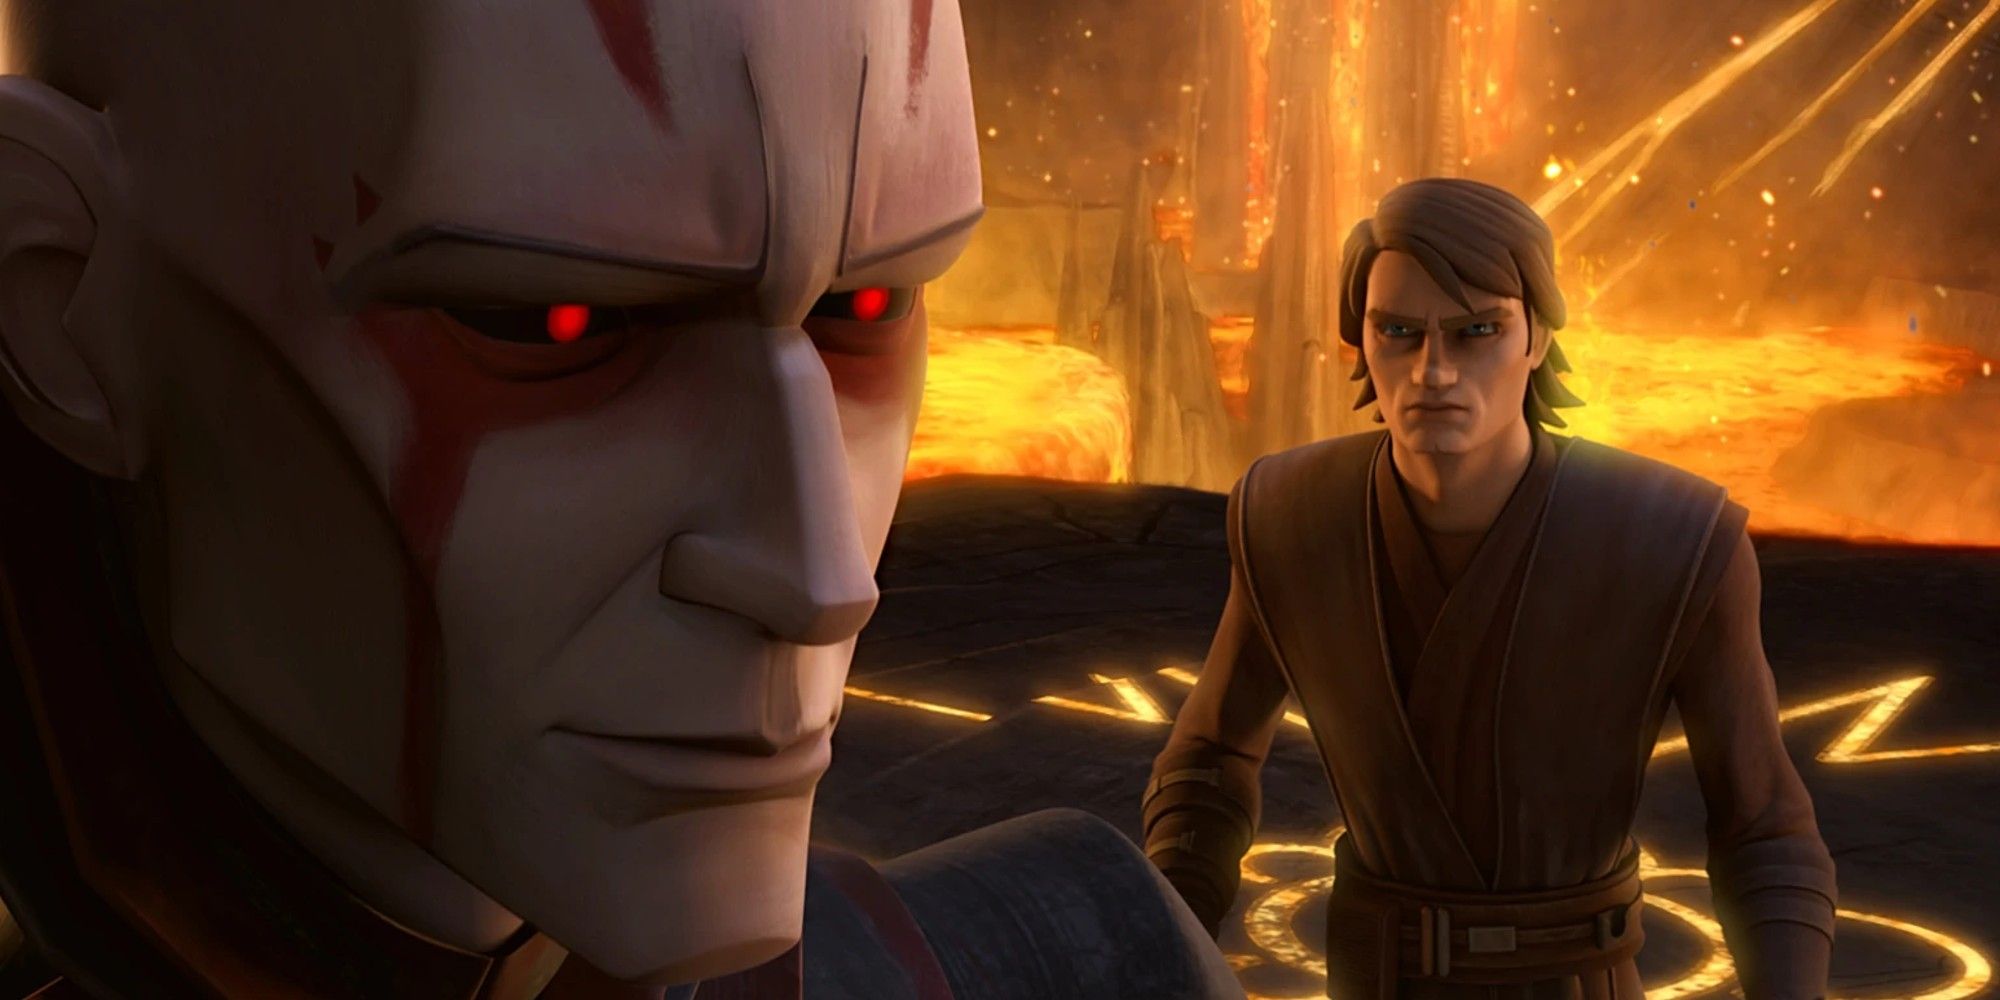 The Son and Anakin from The Mortis Trilogy